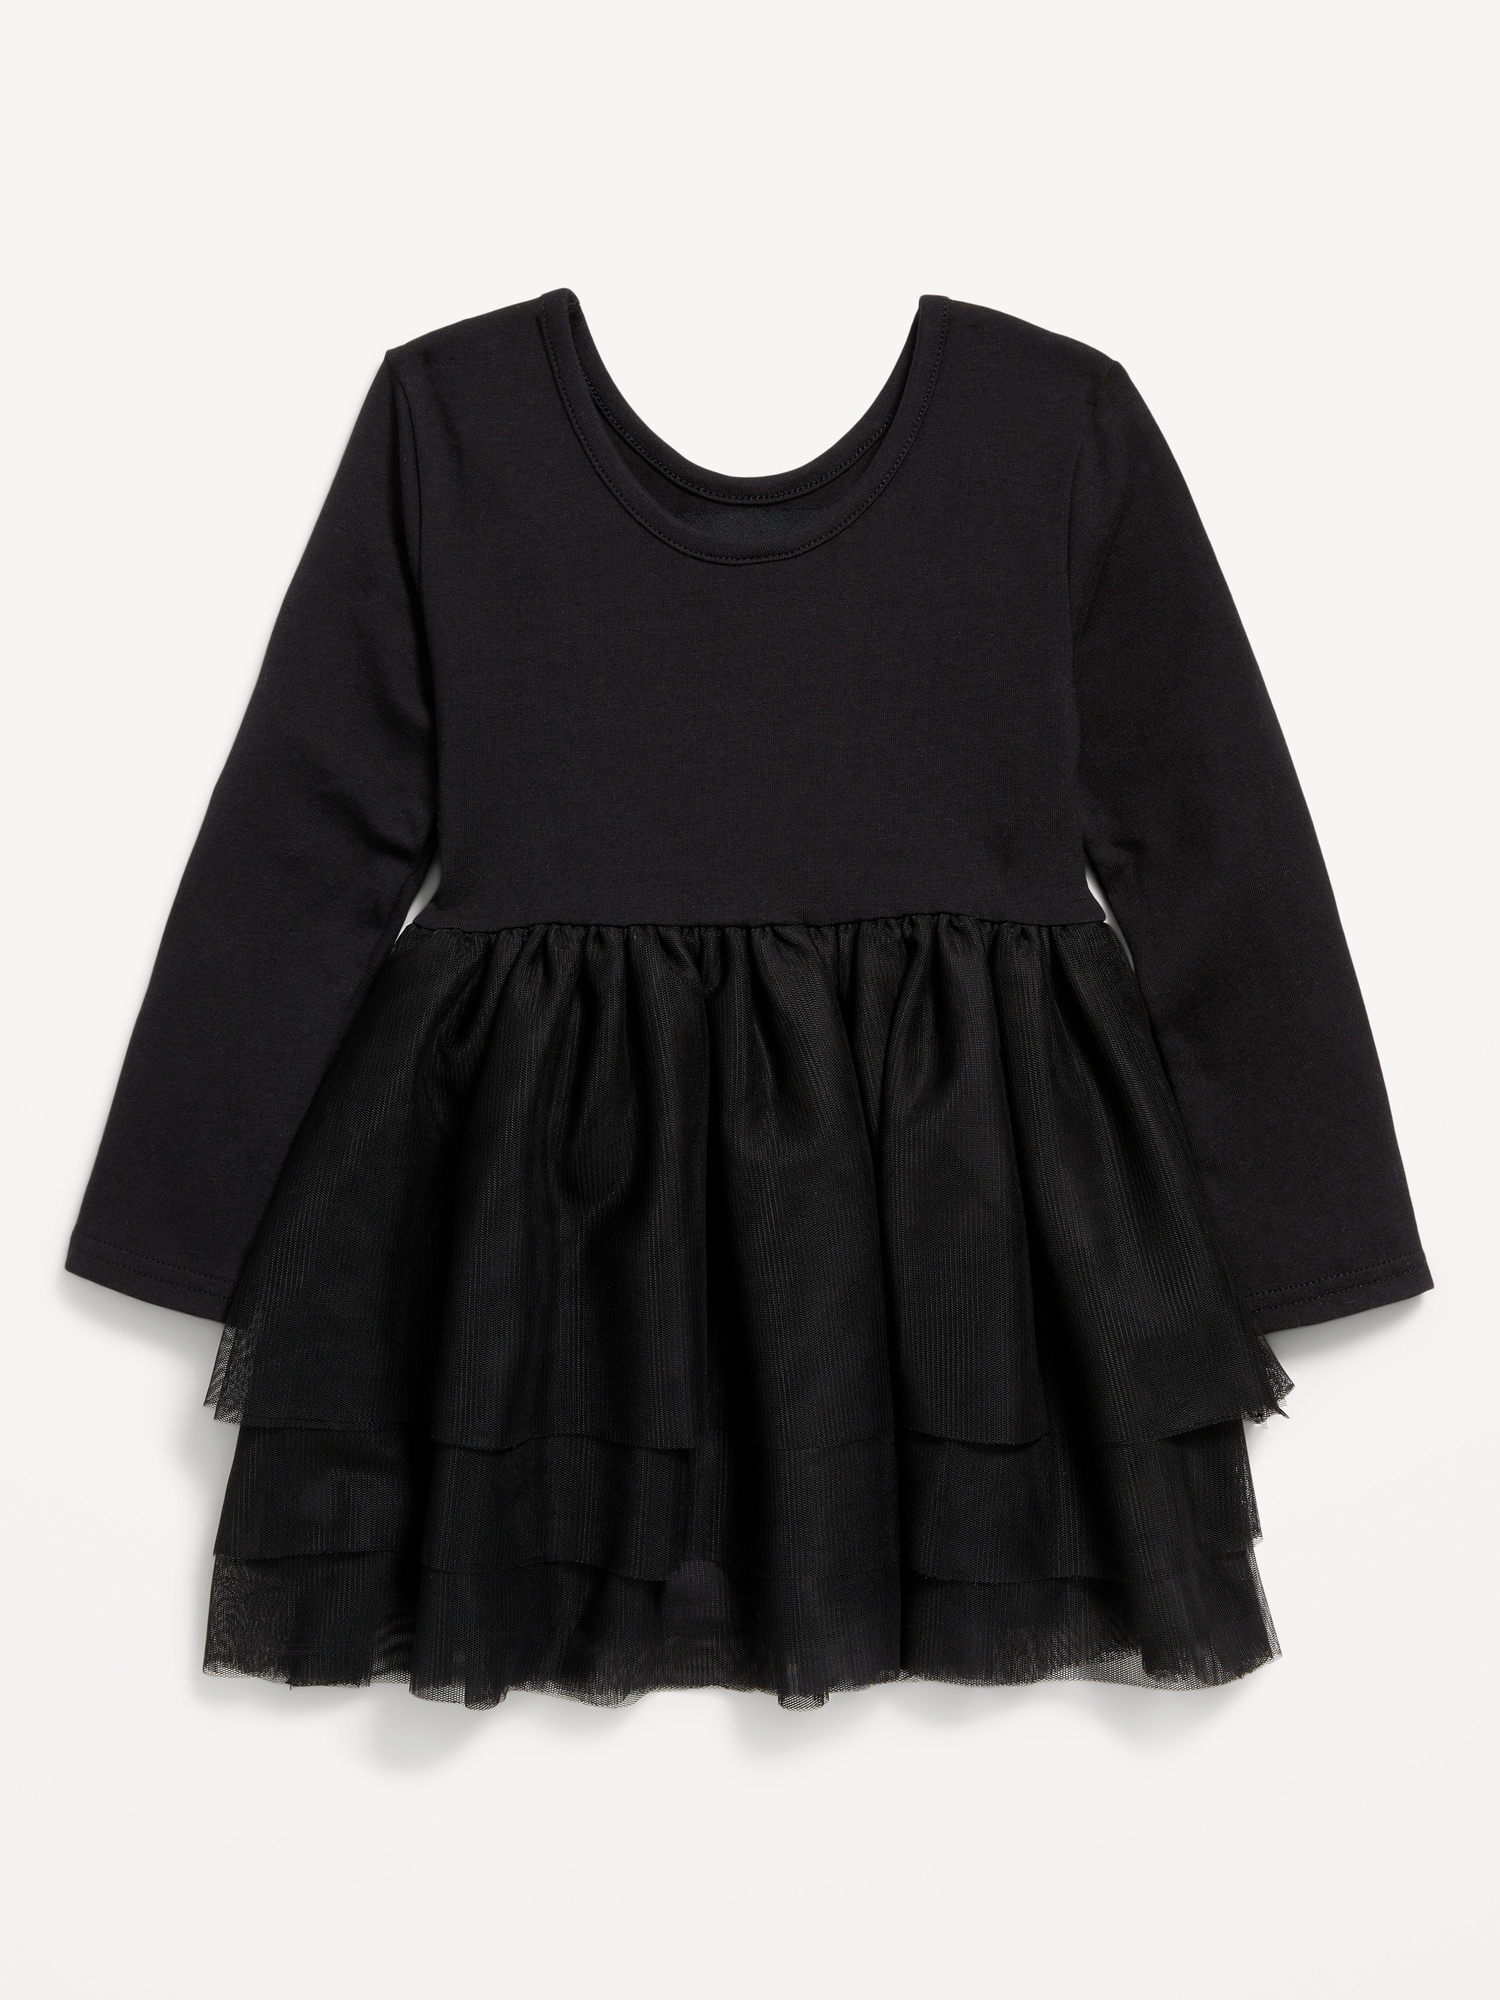 Long-Sleeve Fit and Flare Graphic Tutu Dress for Toddler Girls